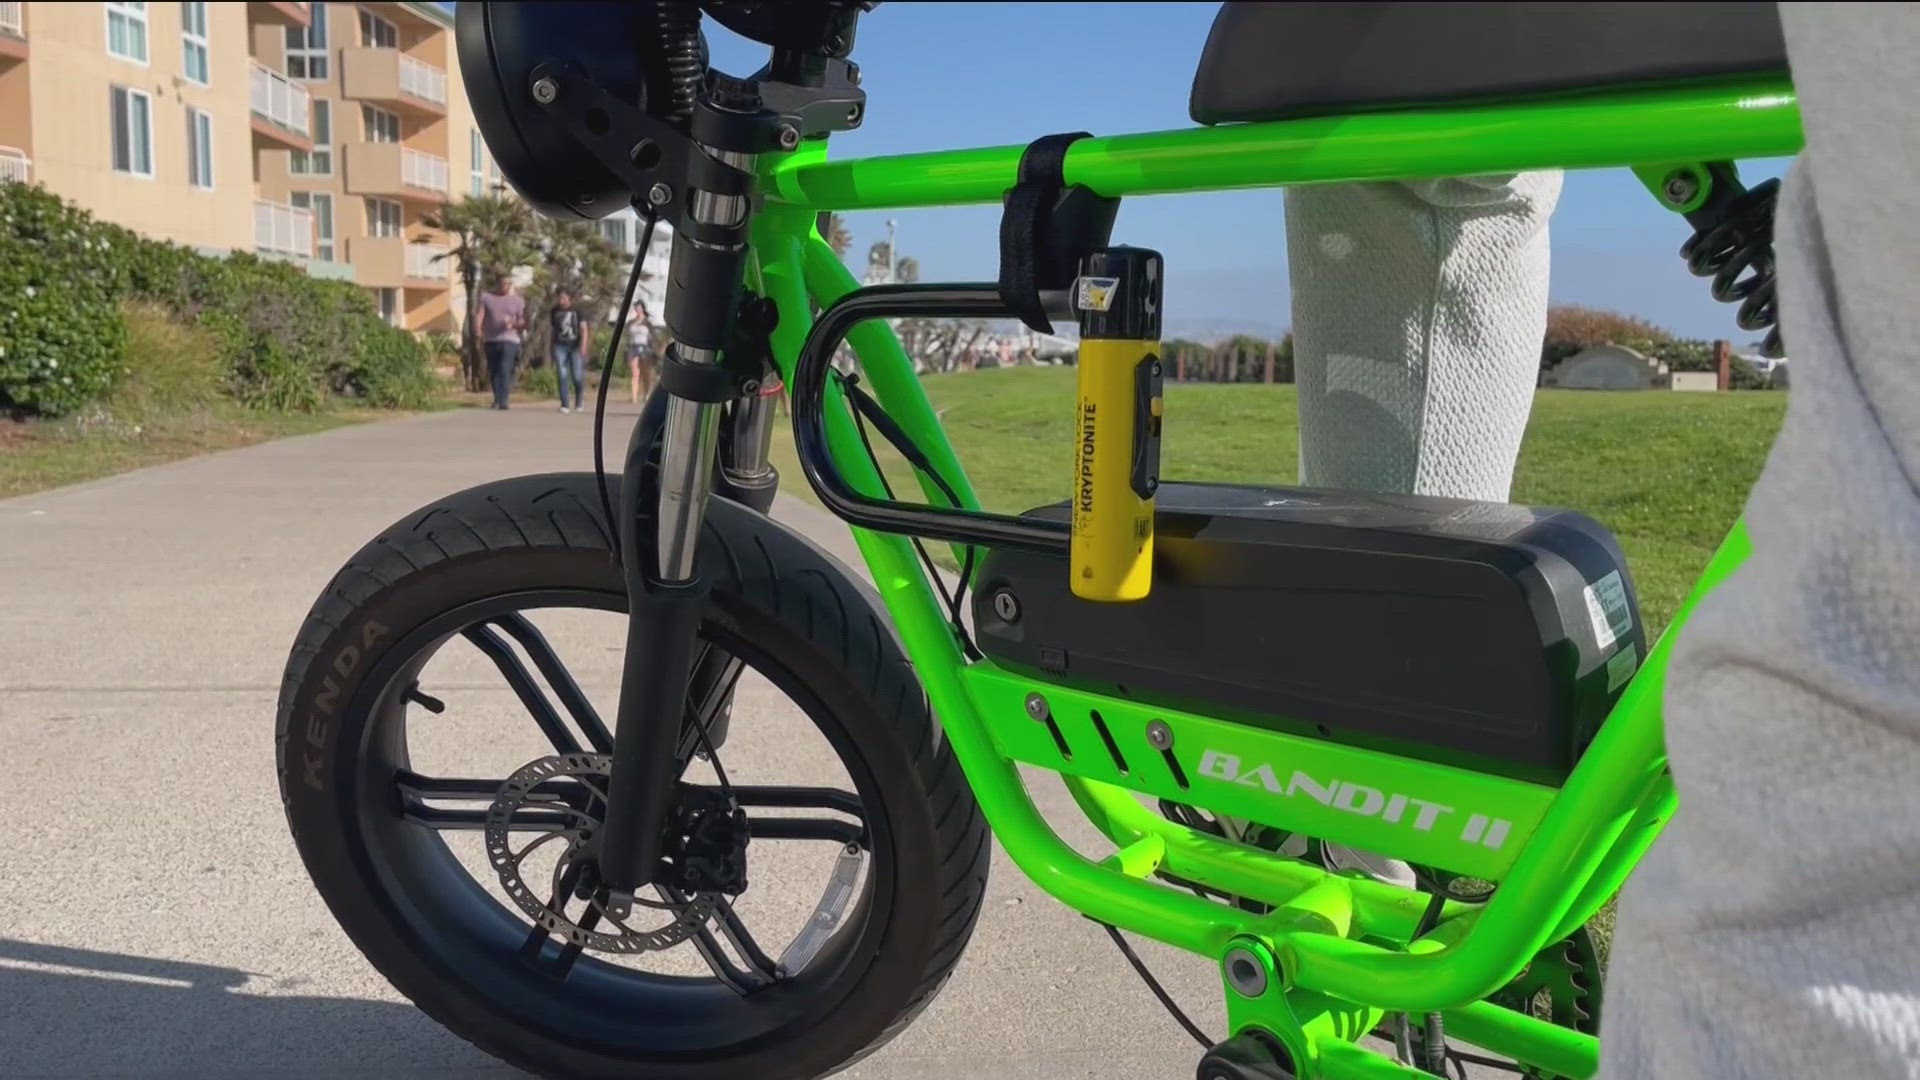 AB 1774 would prohibit a person from selling a product or device that can modify the speed of an e-bike.